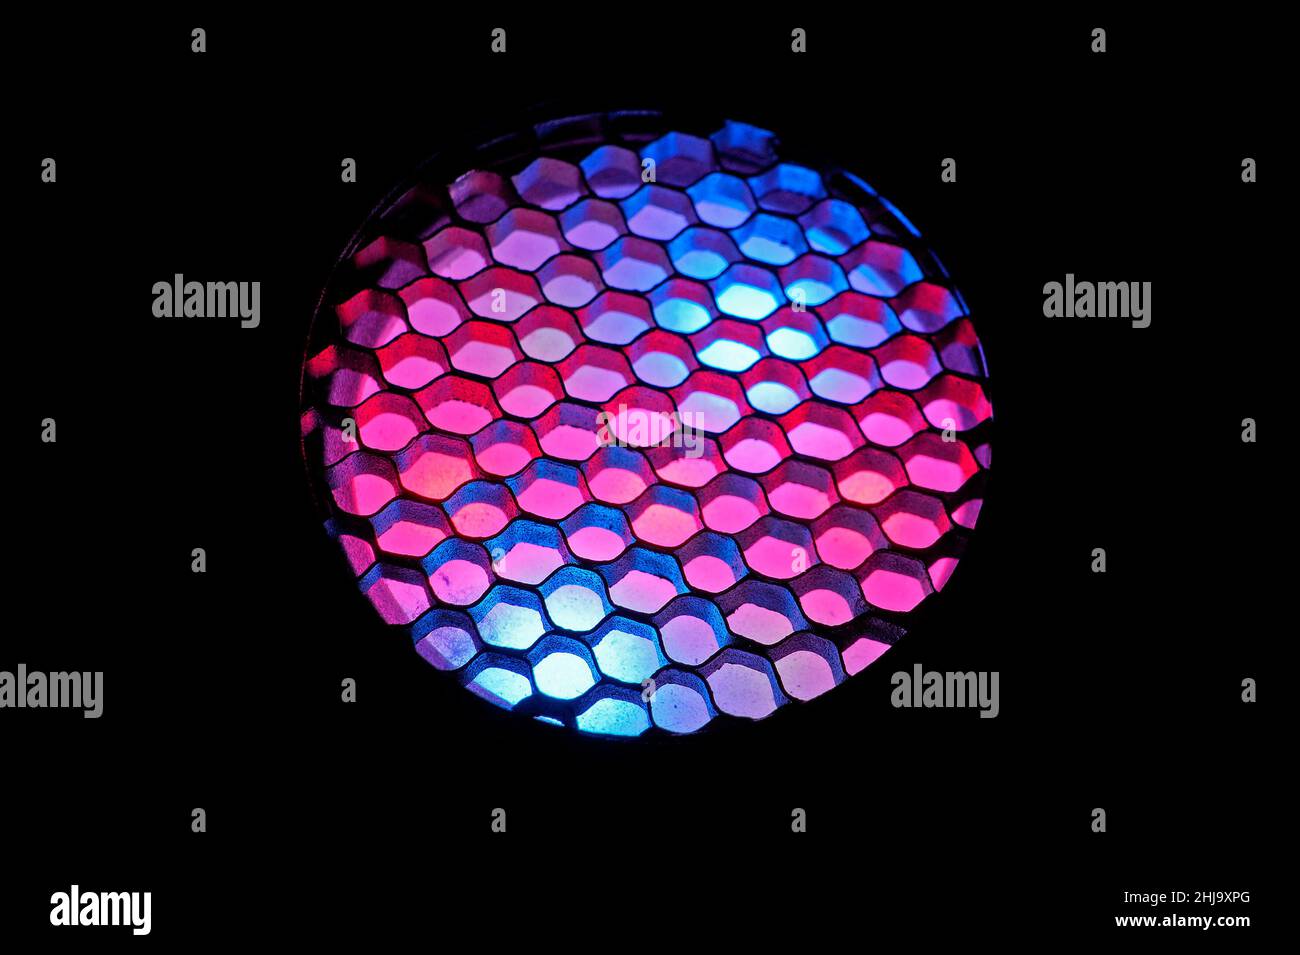 Floodlight with colored light Stock Photo